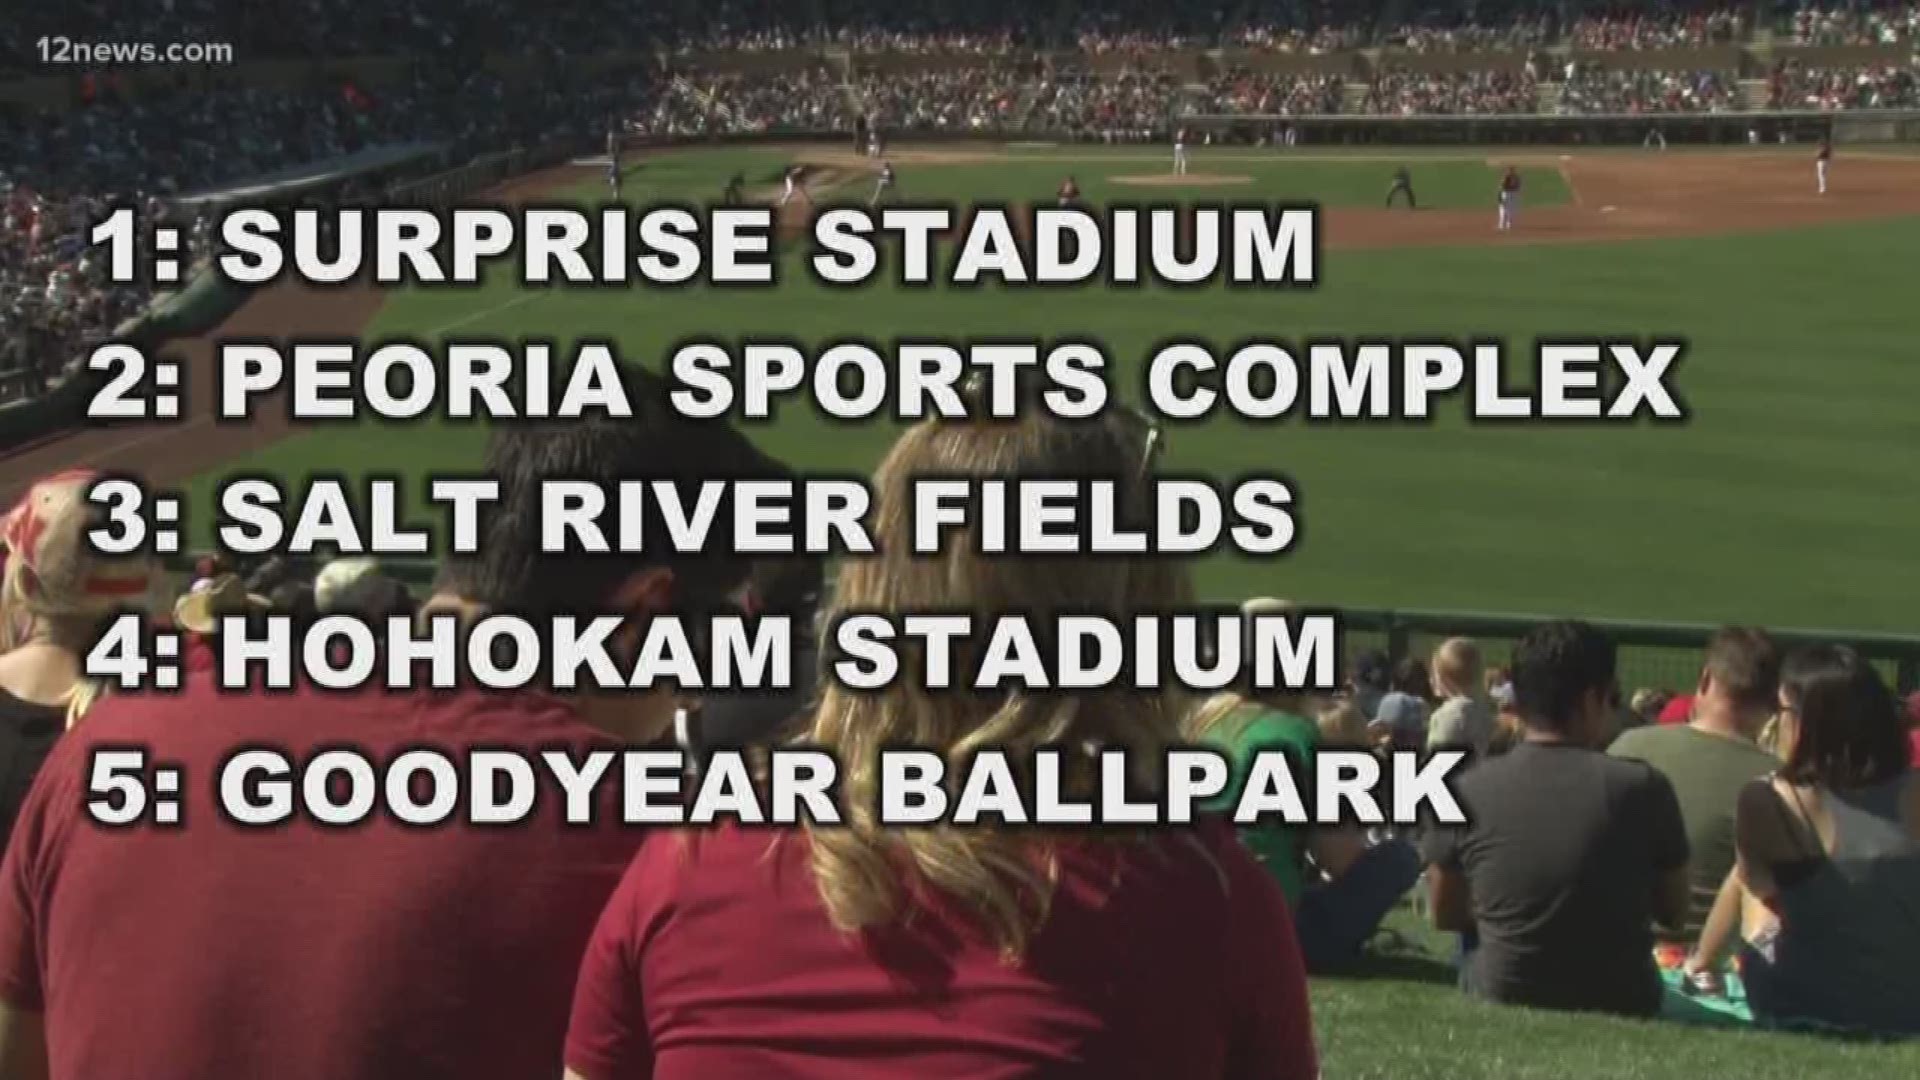 According to a ranking compiled by USA TODAY Surprise Stadium is the best place to watch a spring training game.